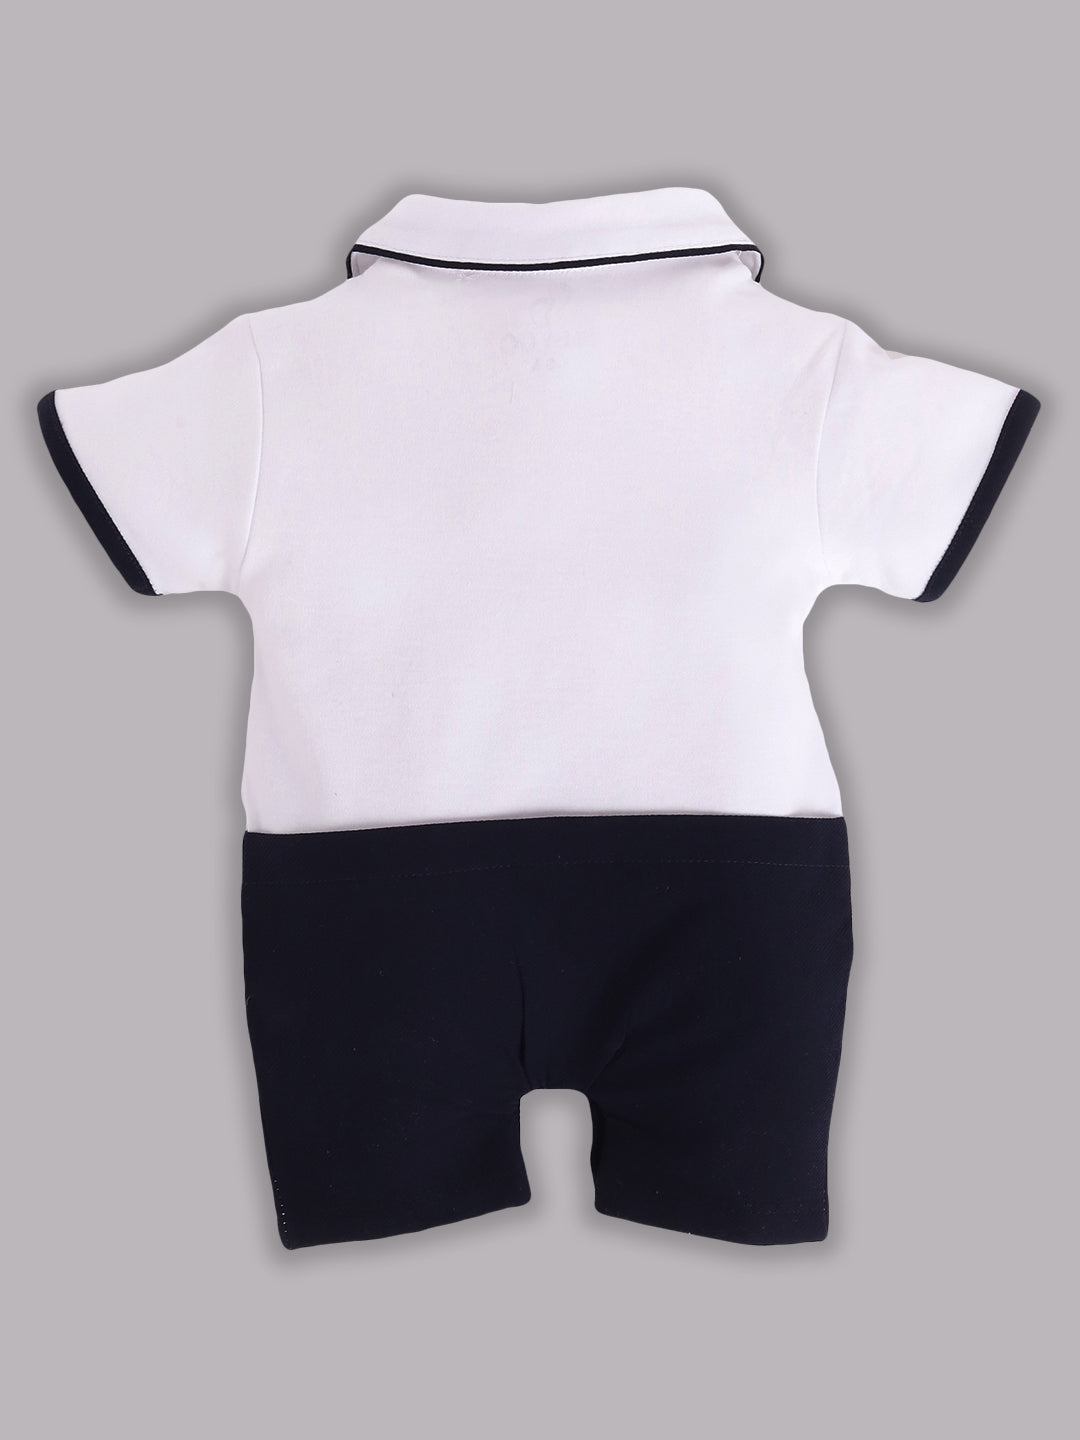 Half Sleeves Round neck Romper/Summer clothes/Creeper/new born/infent wear/ for Baby Boys 100% Pure Cotton-NAVY